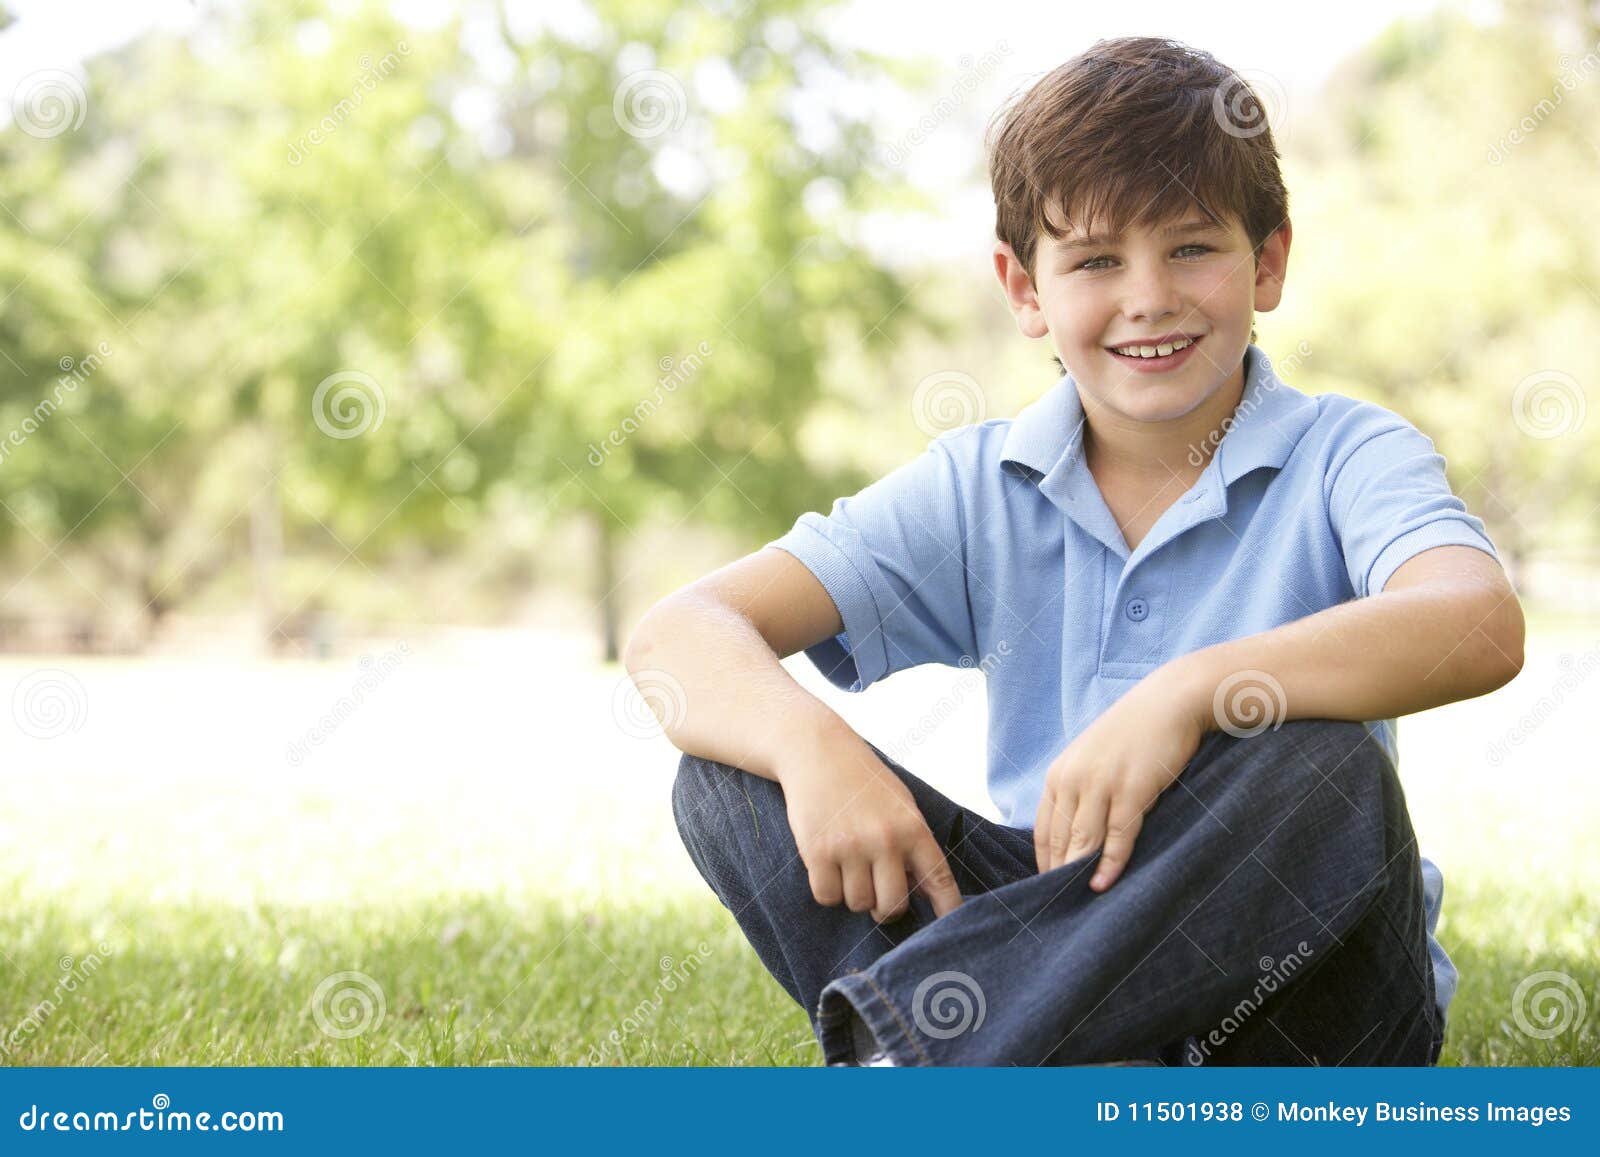 Portrait Of Young Boy Sitting In Park Royalty Free Stock Photos - Image ...